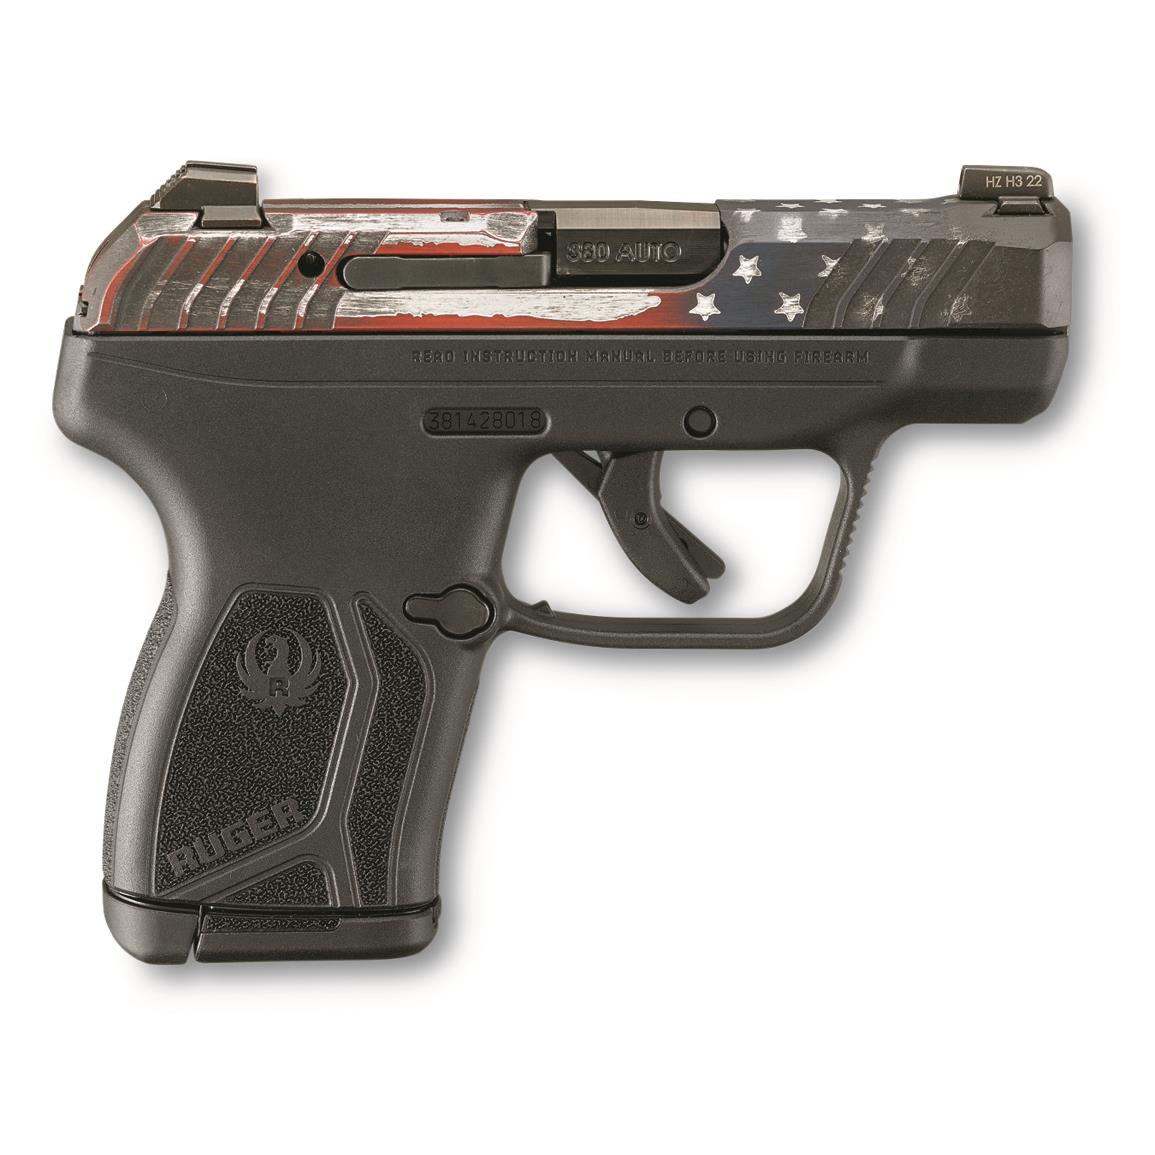 Ruger LCP MAX, Semi-automatic, .380 ACP, 2.8 Barrel, American Flag Slide,  10+1 Rounds - 735061, Semi-Automatic at Sportsman's Guide